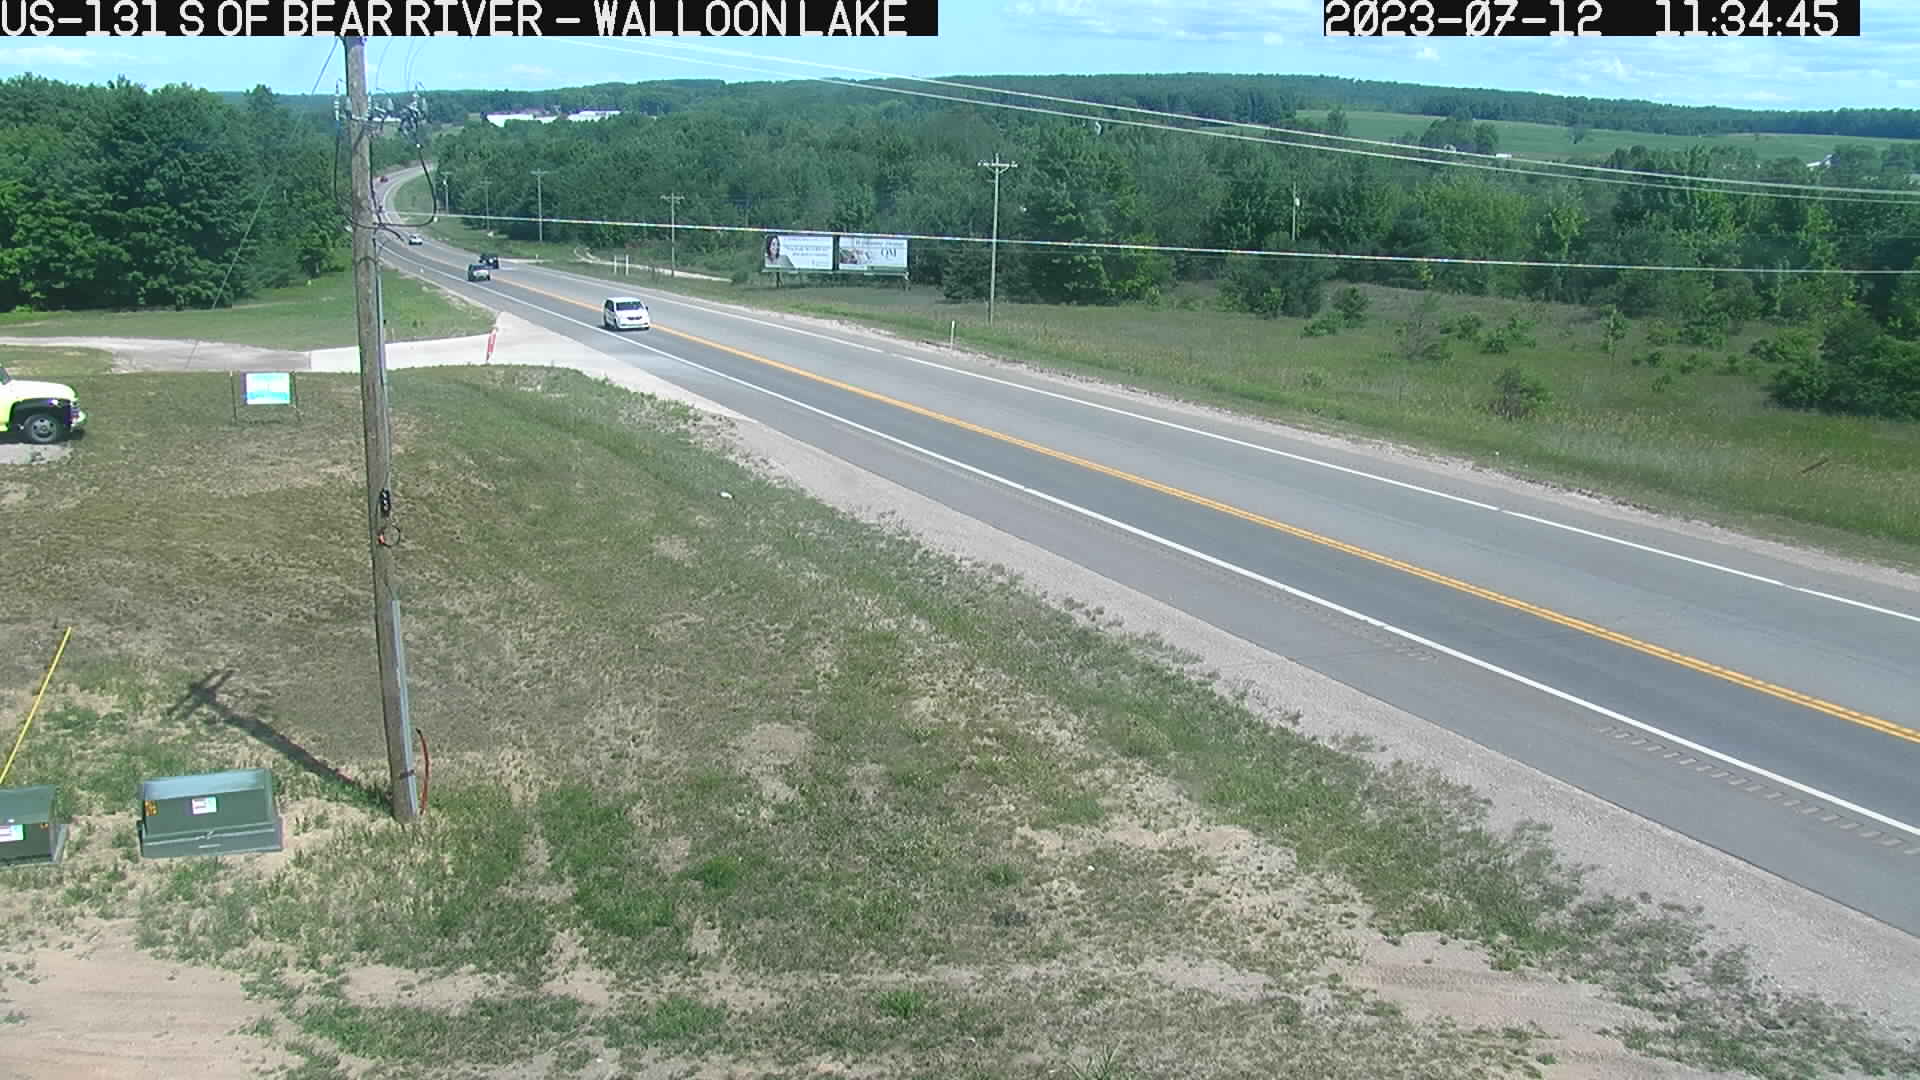 Traffic Cam @ Bear River Road - Traffic closest to camera Player